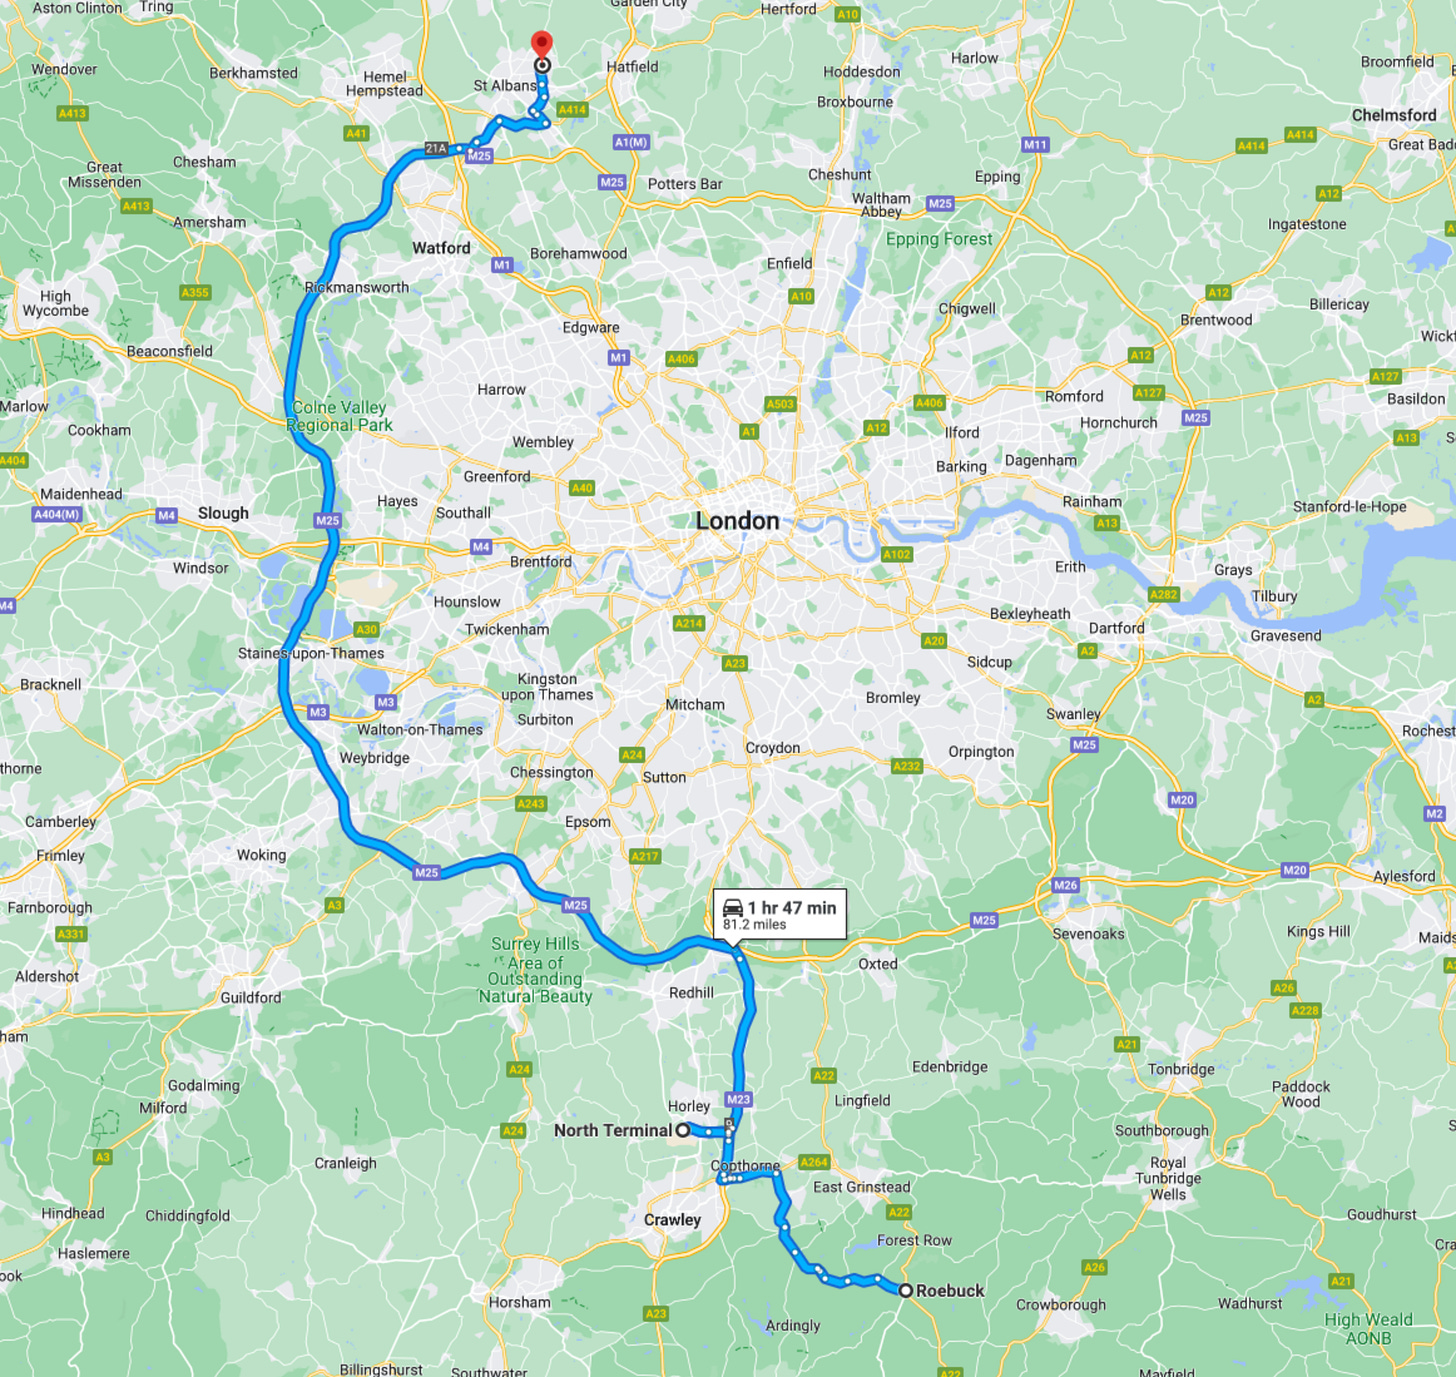 A map showing our route from Roebuck to St. Albans in the UK